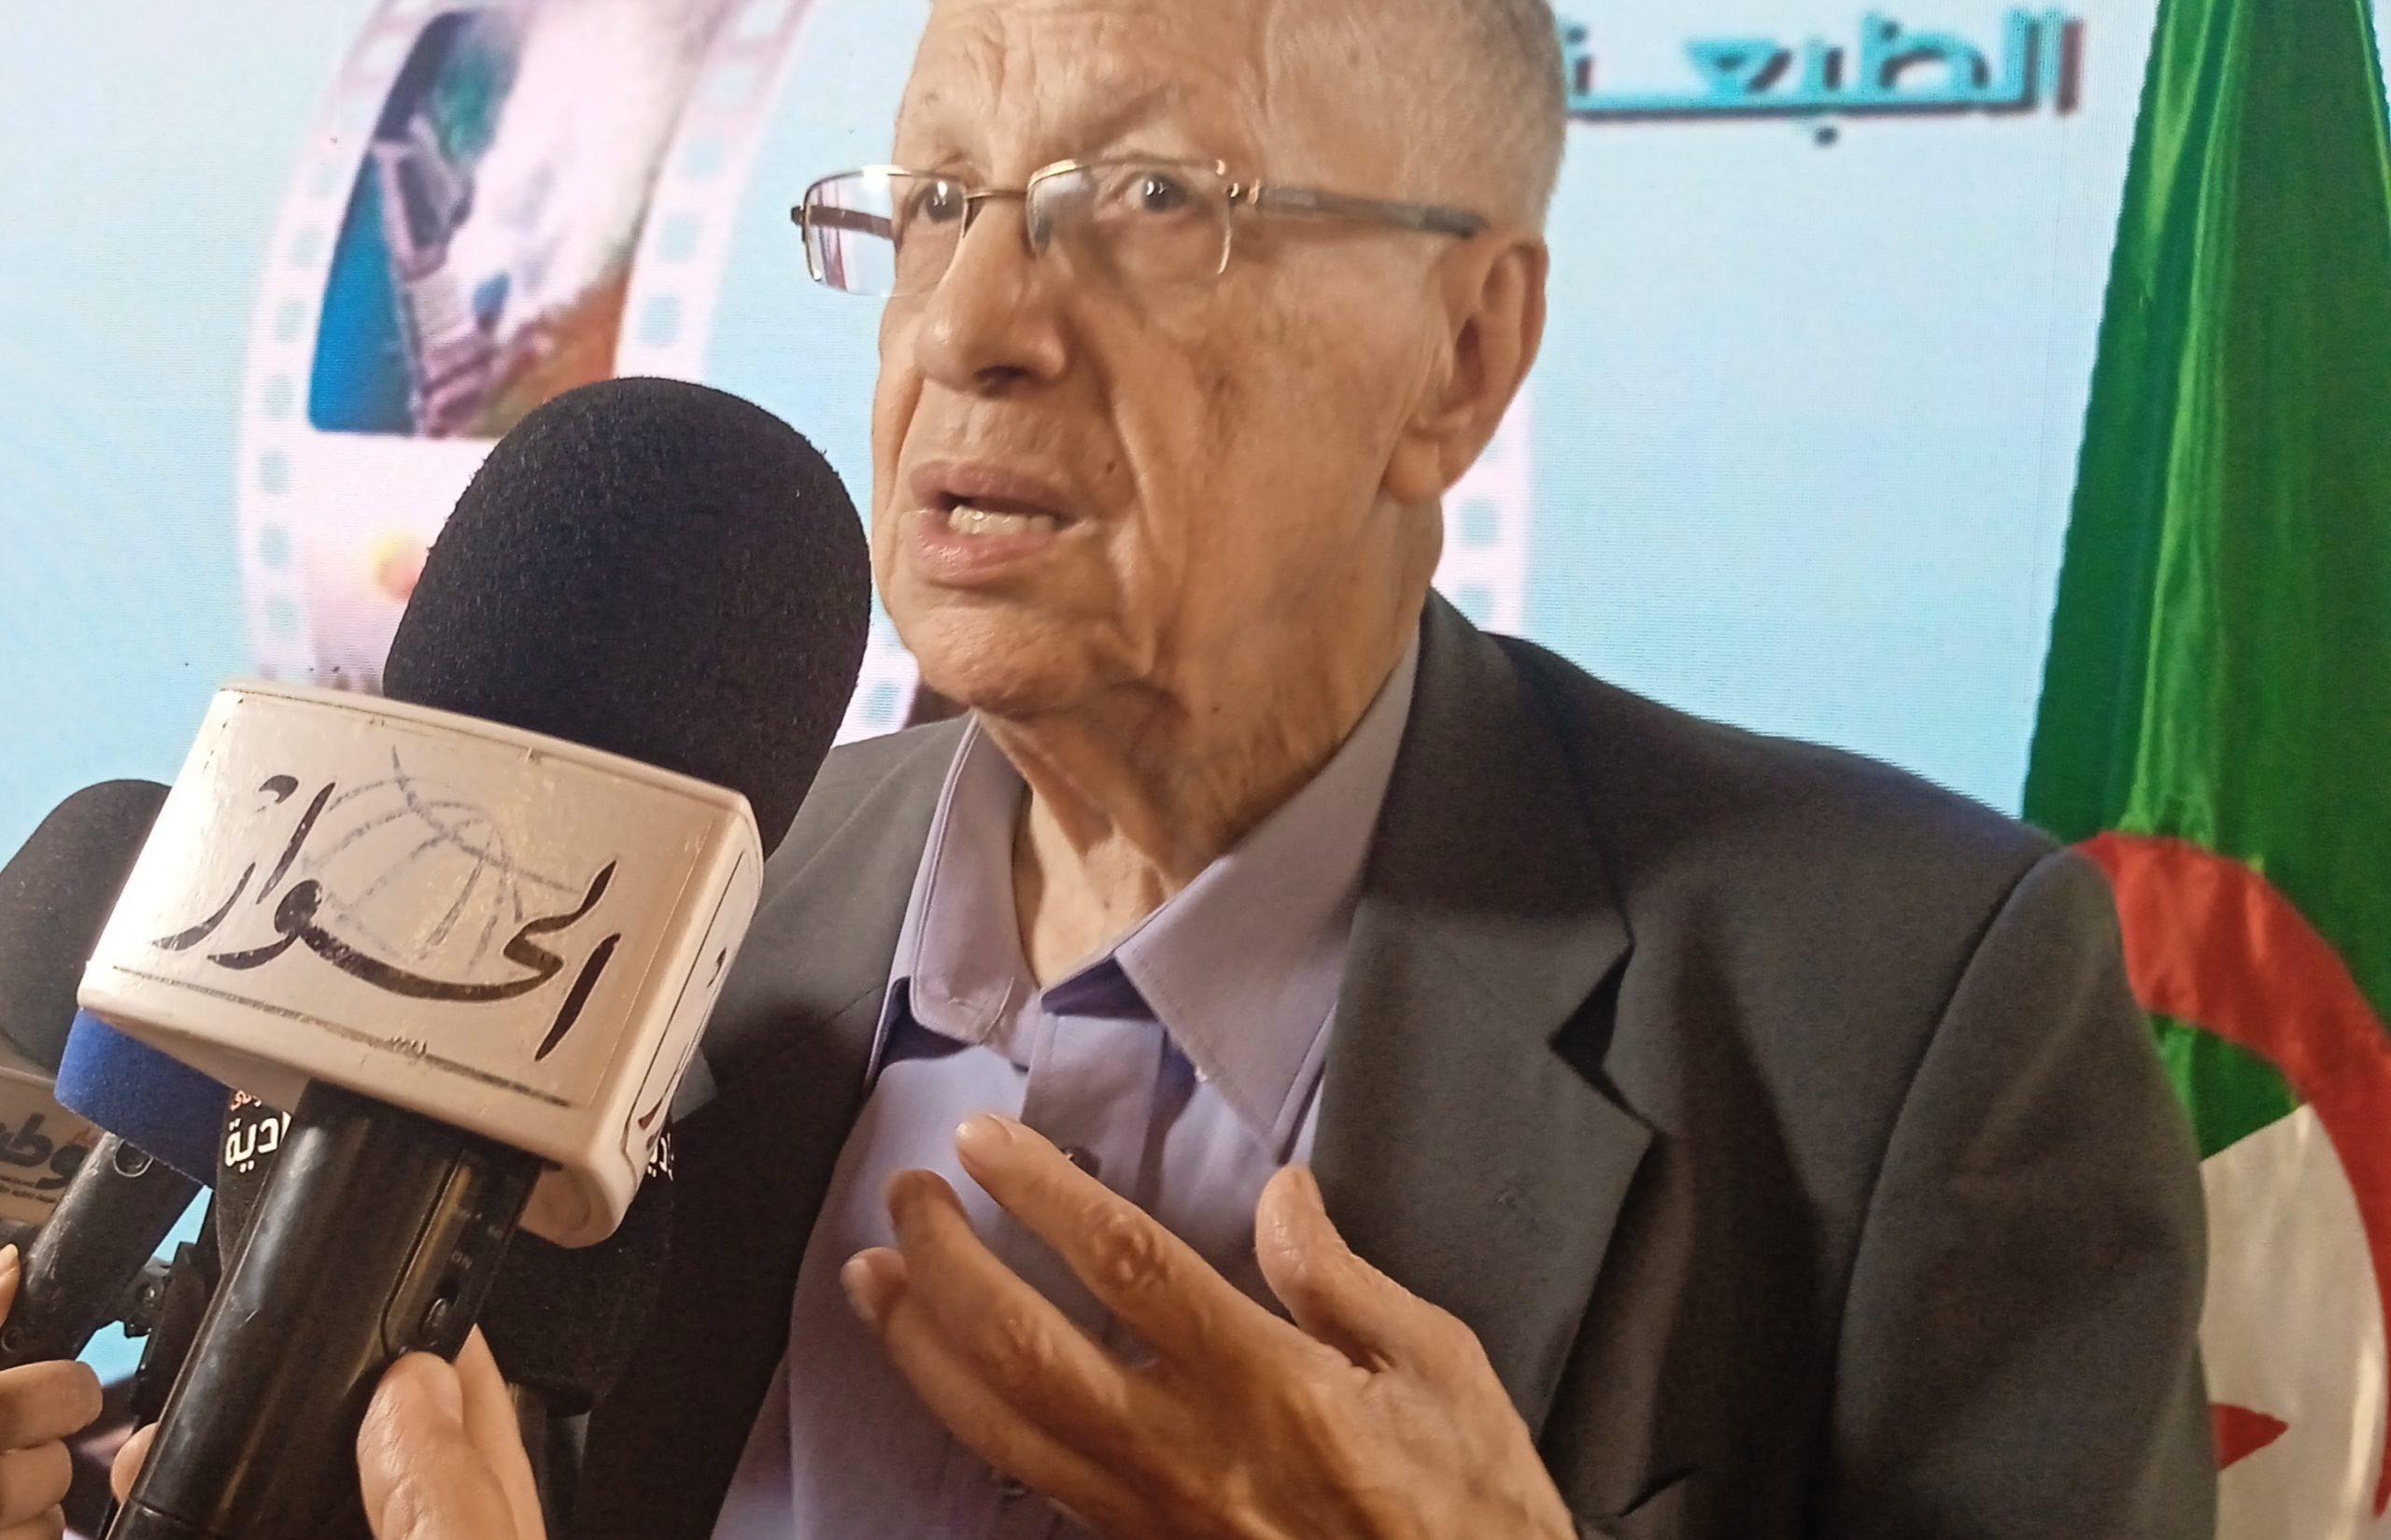 Chairman of the Professional Journalist Belkacem Djaballah’s Dialogue Committee: “I am happy with the confidence placed in my person...and the members of the committee are important names” - Algerian Dialogue